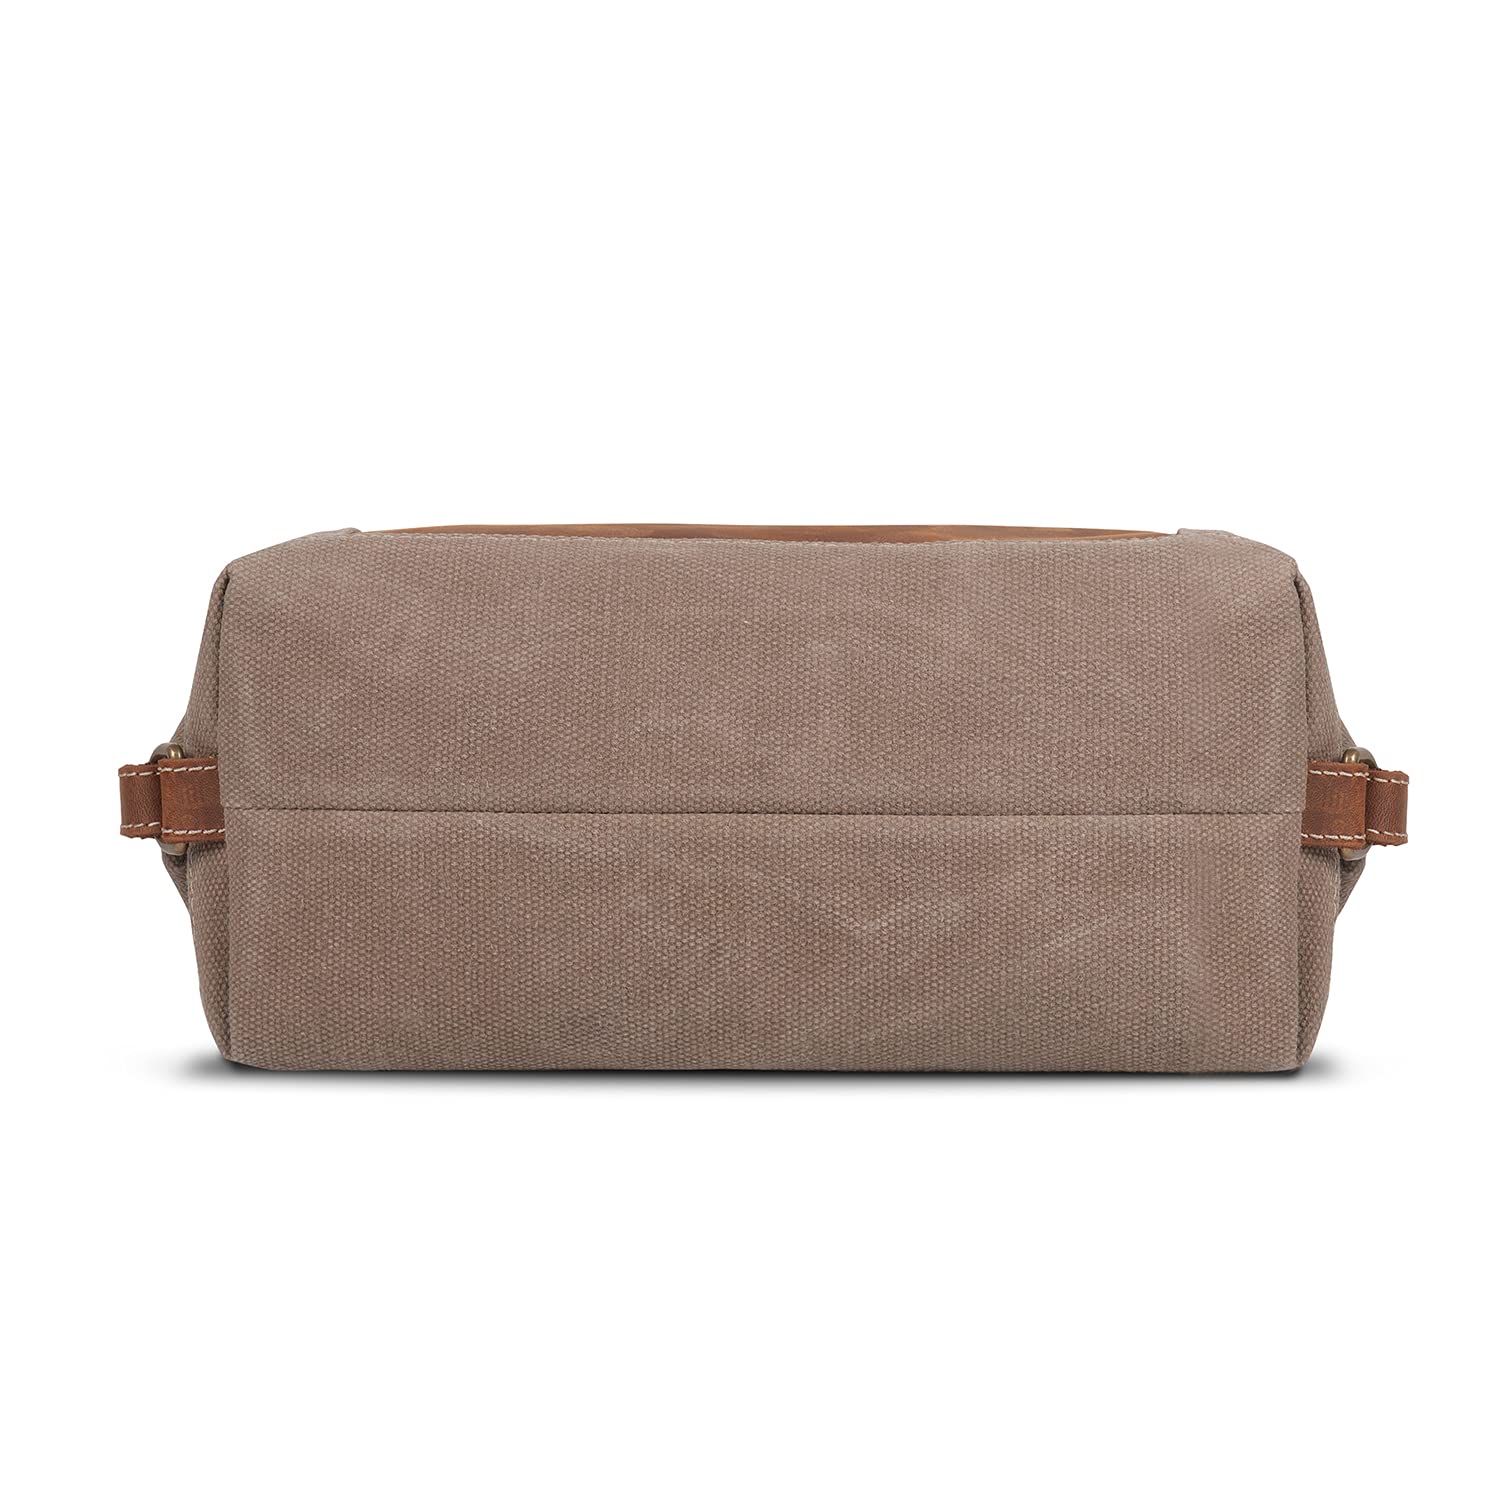 Londo Toiletry Bag Genuine Leather and Canvas Travel Toiletry Bag Dopp Kit - Unisex - Camel